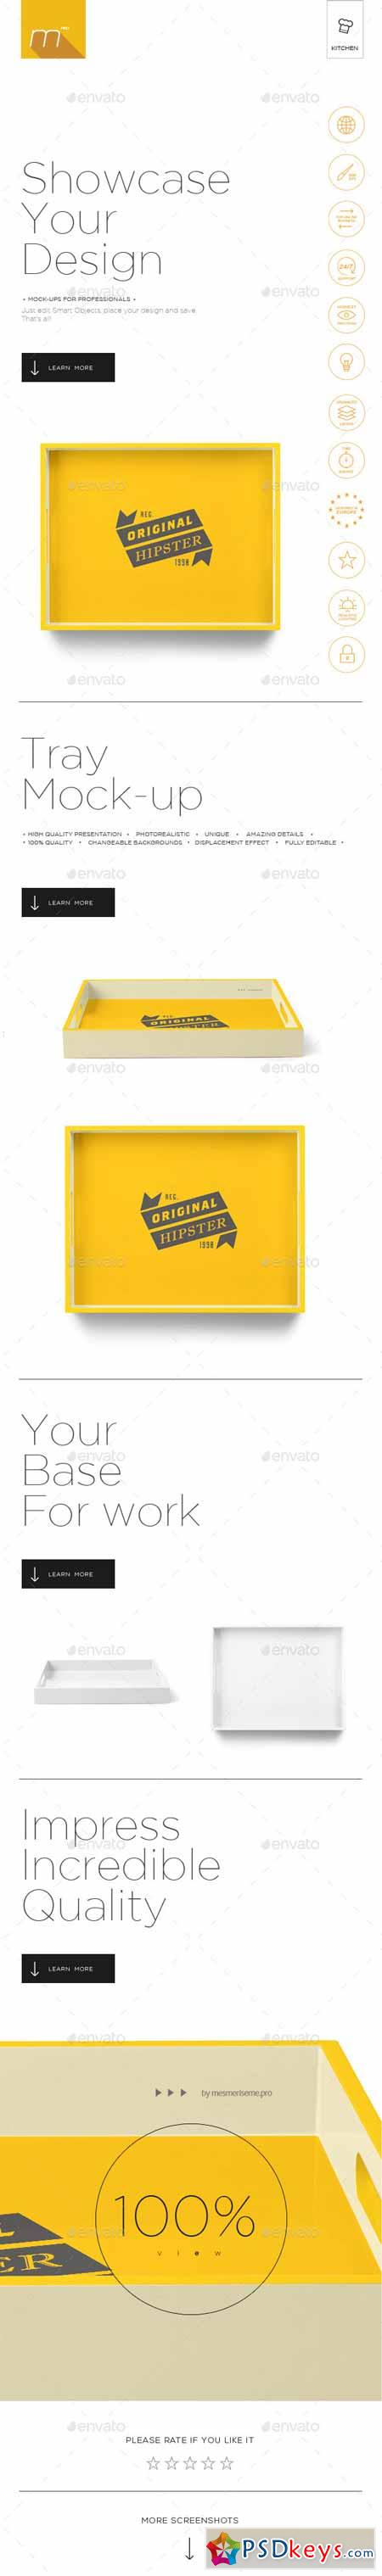 Download Tray Mock-up 11477673 » Free Download Photoshop Vector ...